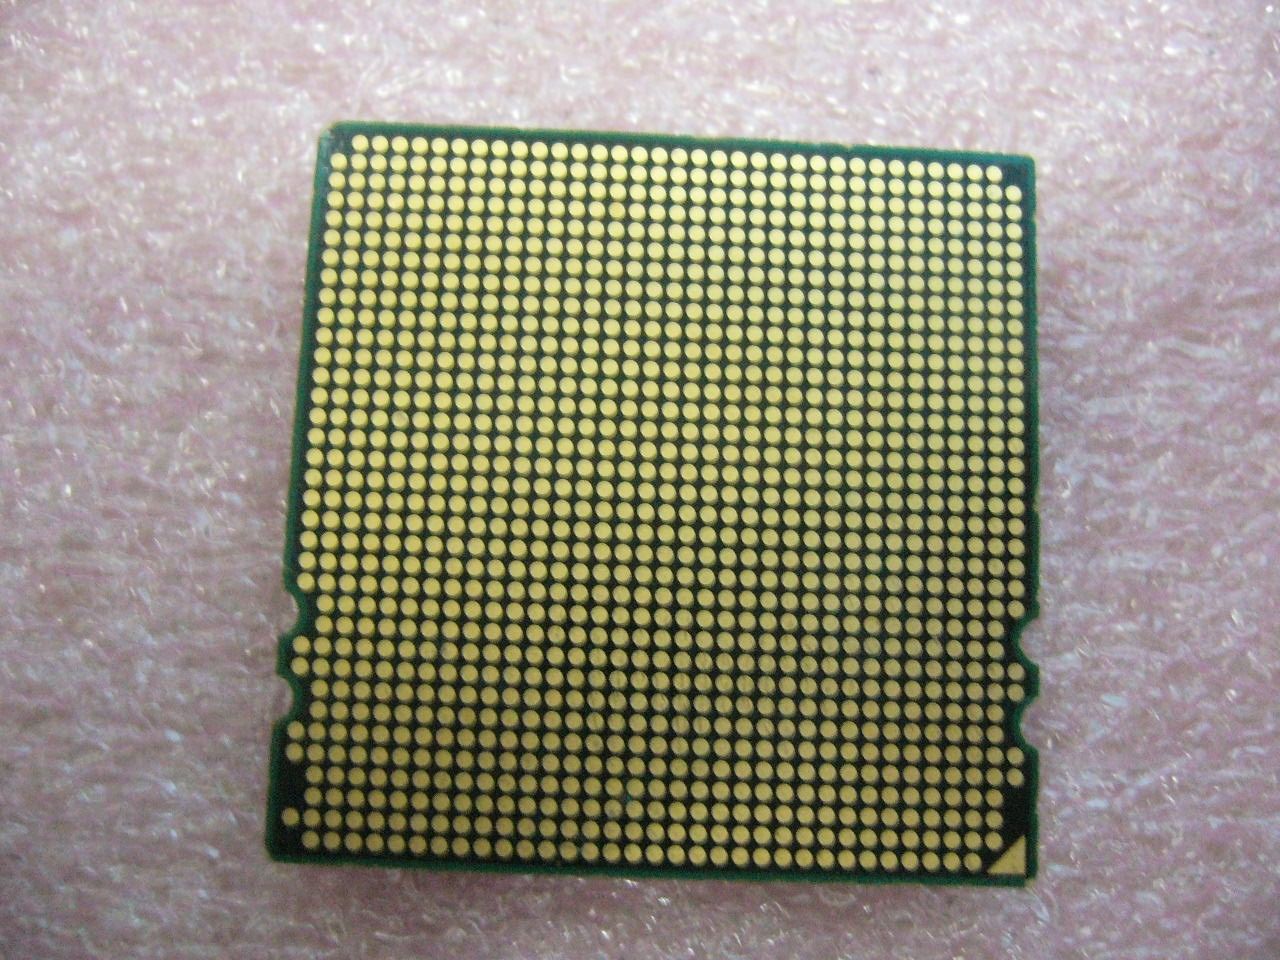 QTY 1x AMD Opteron 2431 2.4 GHz Six Core (OS2431WJS6DGN) CPU Socket F 1207 - Click Image to Close